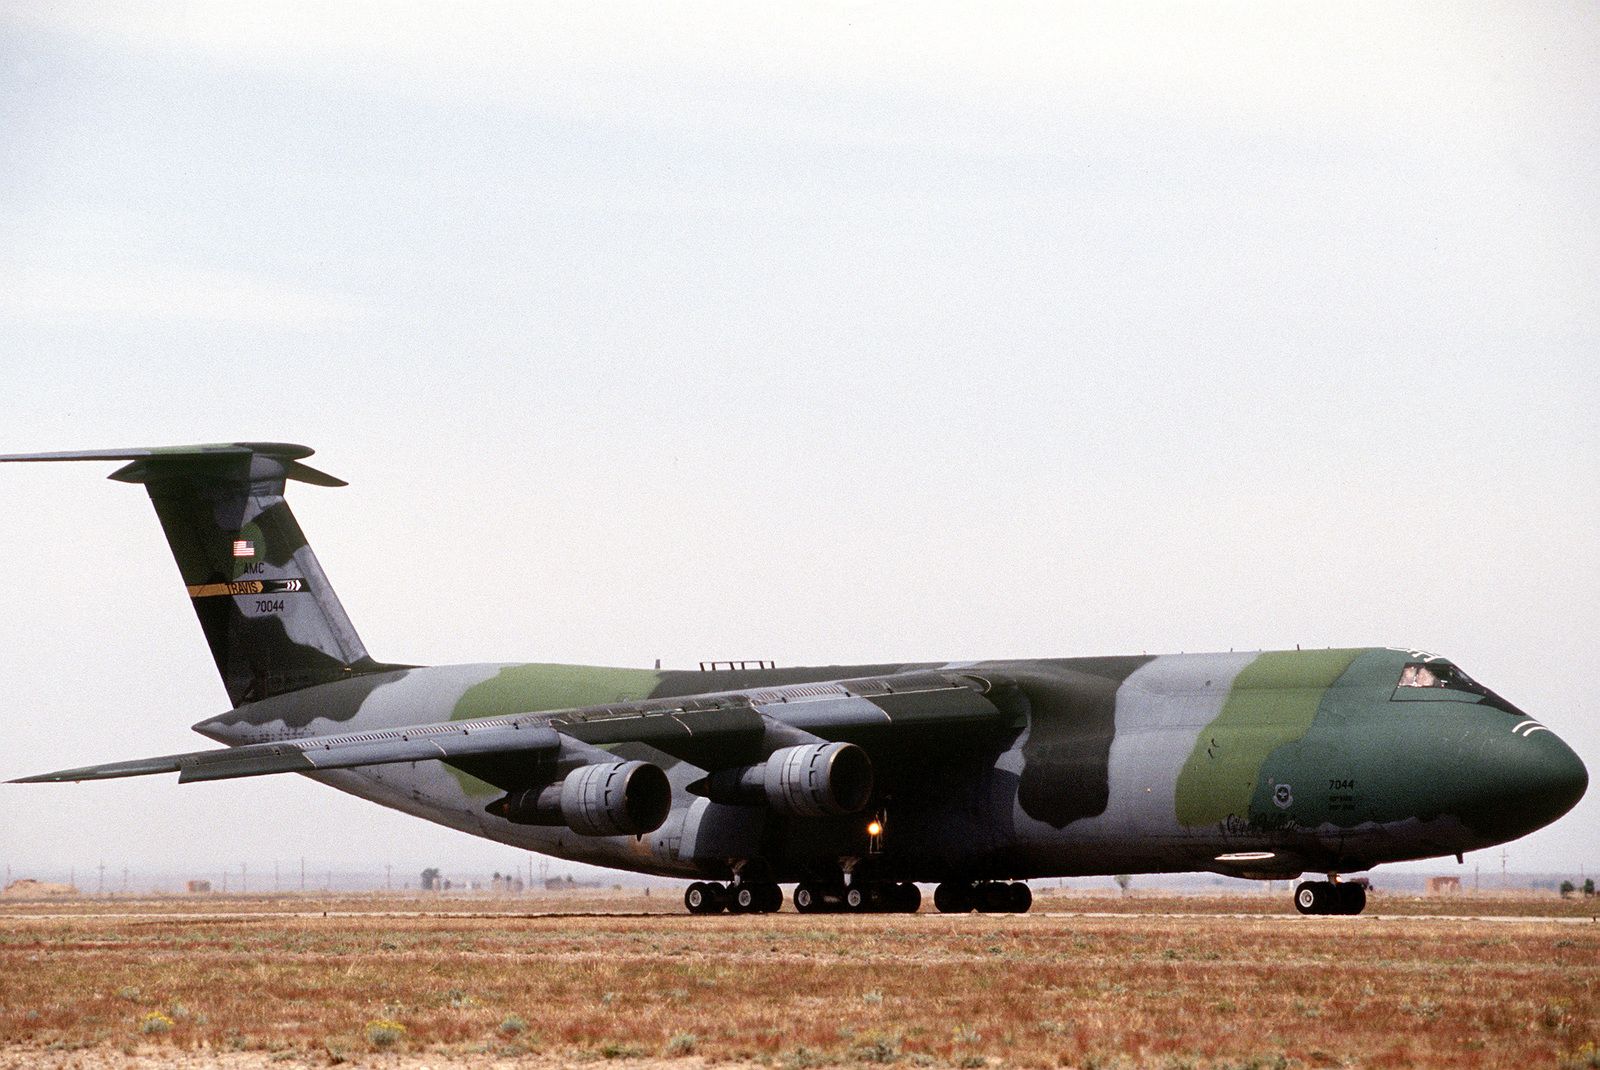 a-side-view-of-a-c-5-galaxy-in-camouflage-paint-from-travis-afb-ca-taxis-down-35e55e-1600